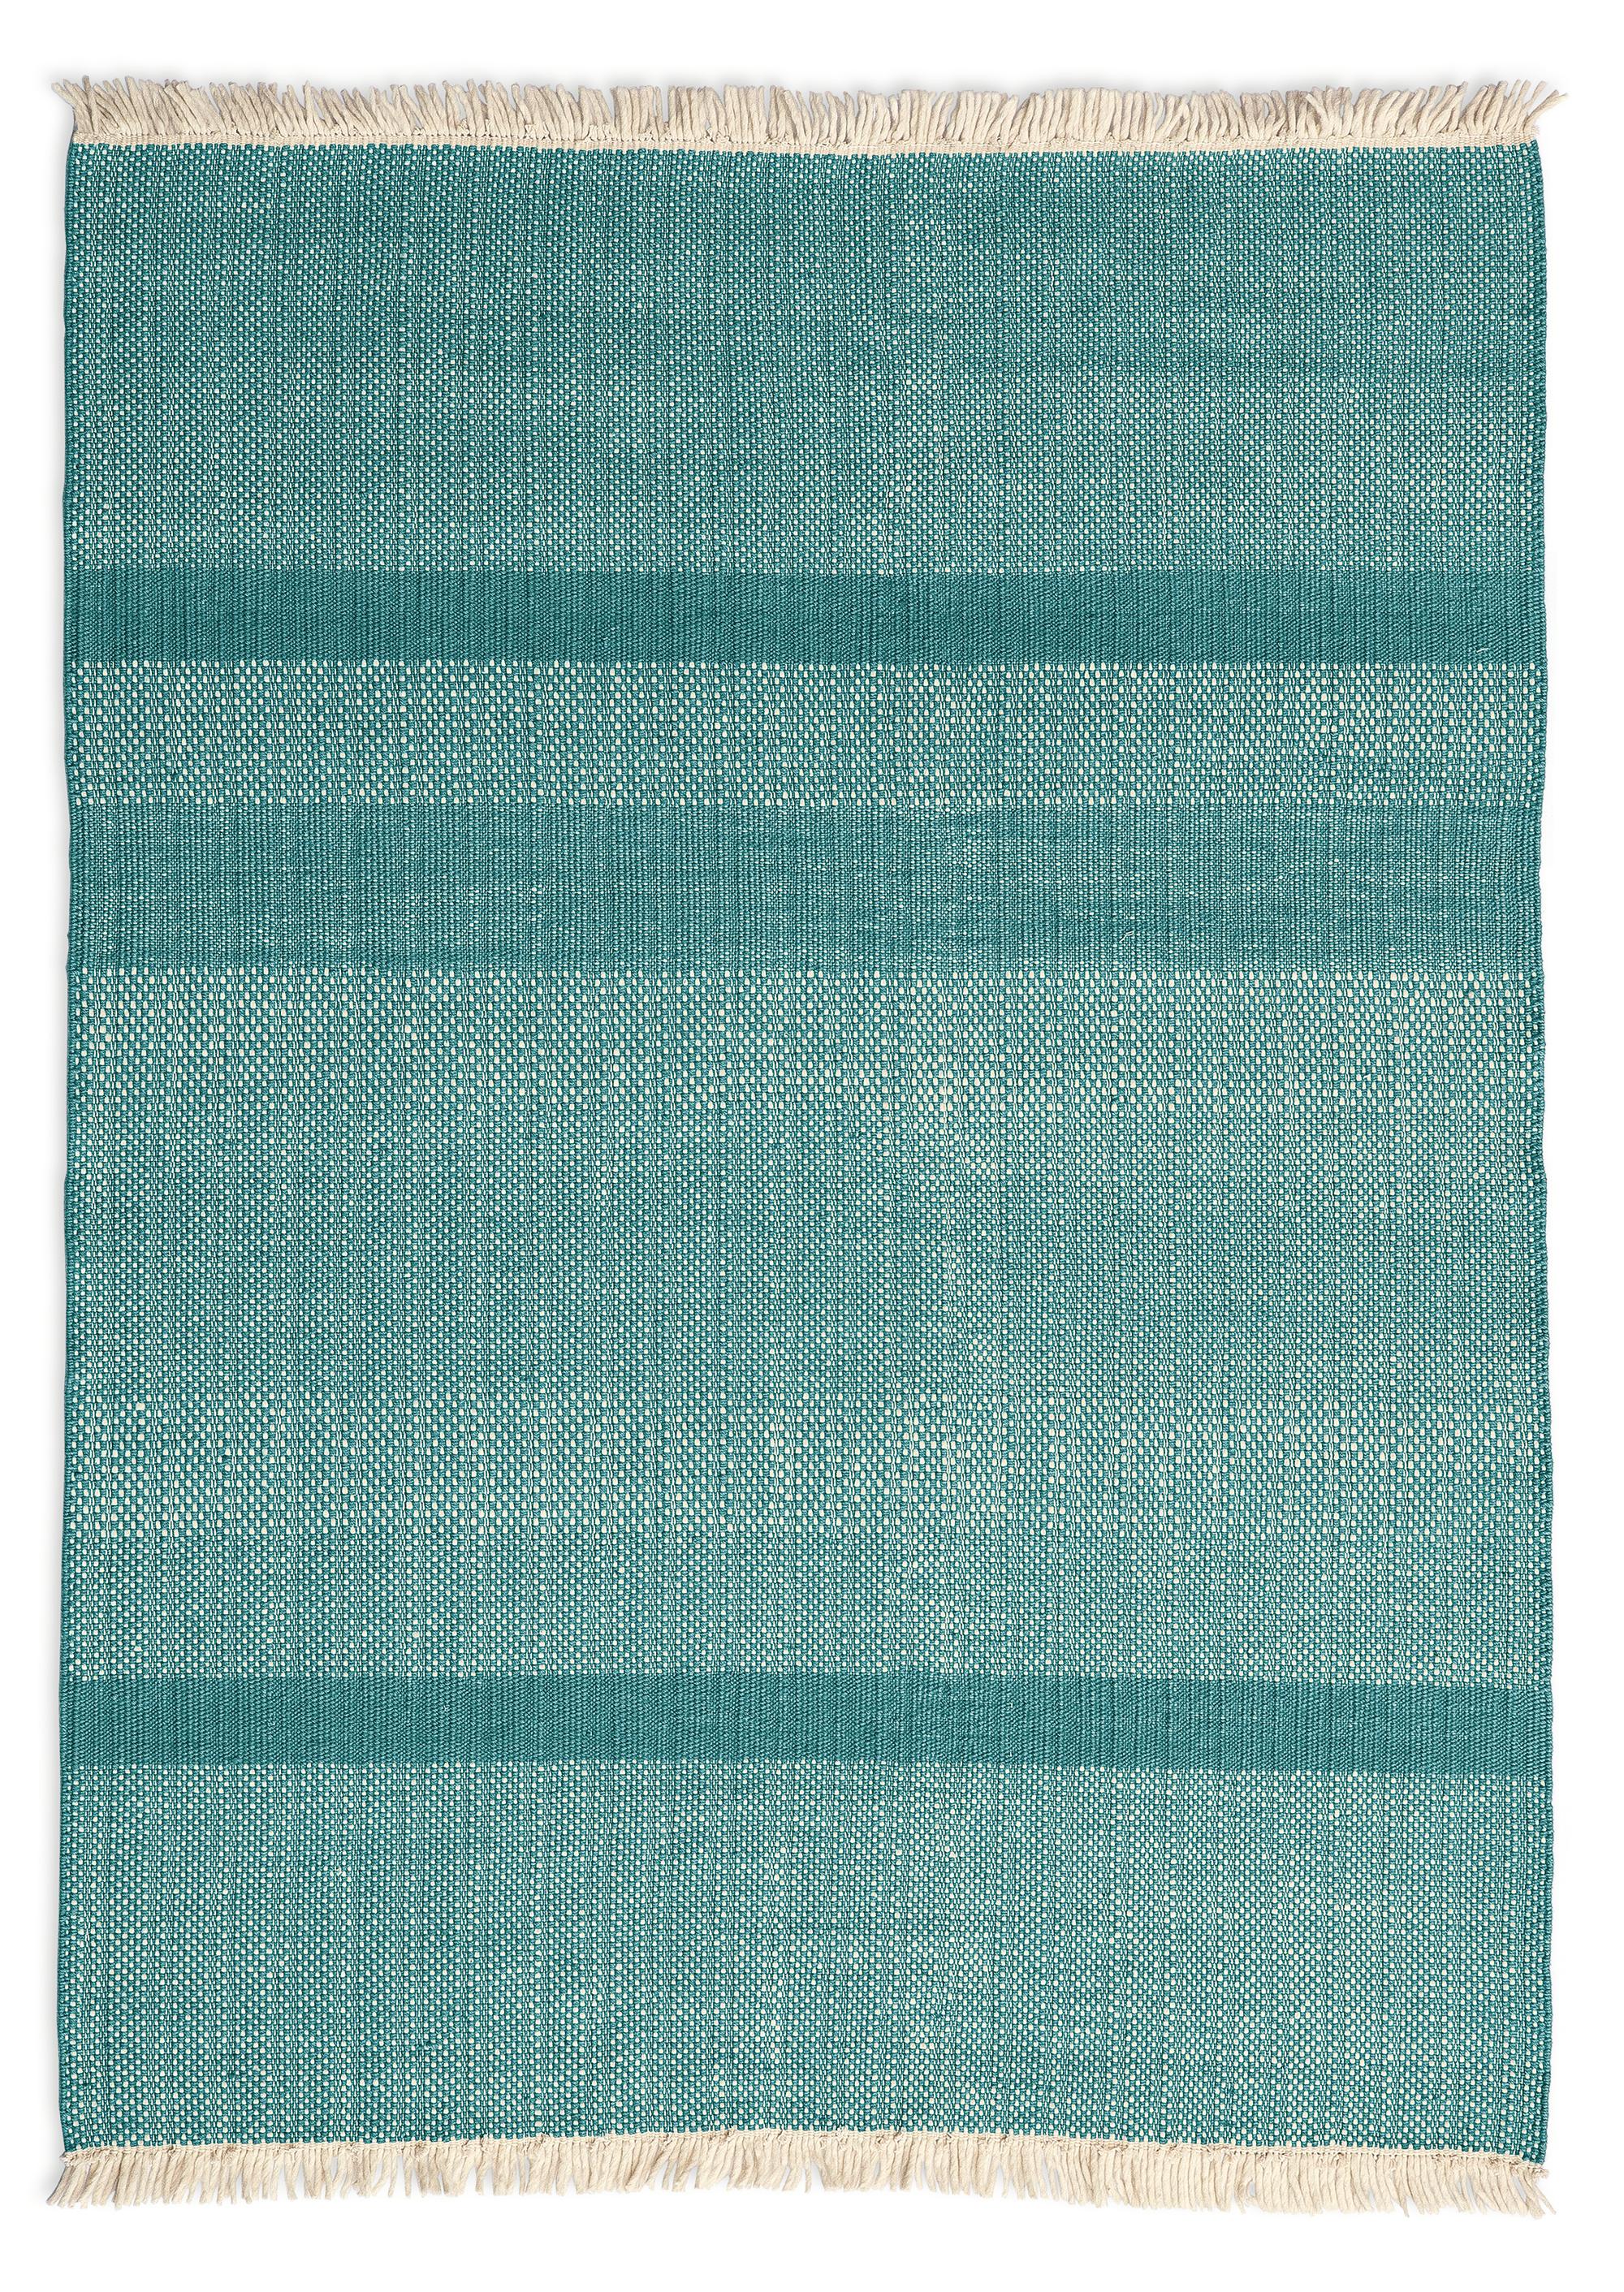 'Tres Texture' Hand-Loomed Rug for Nanimarquina For Sale 1